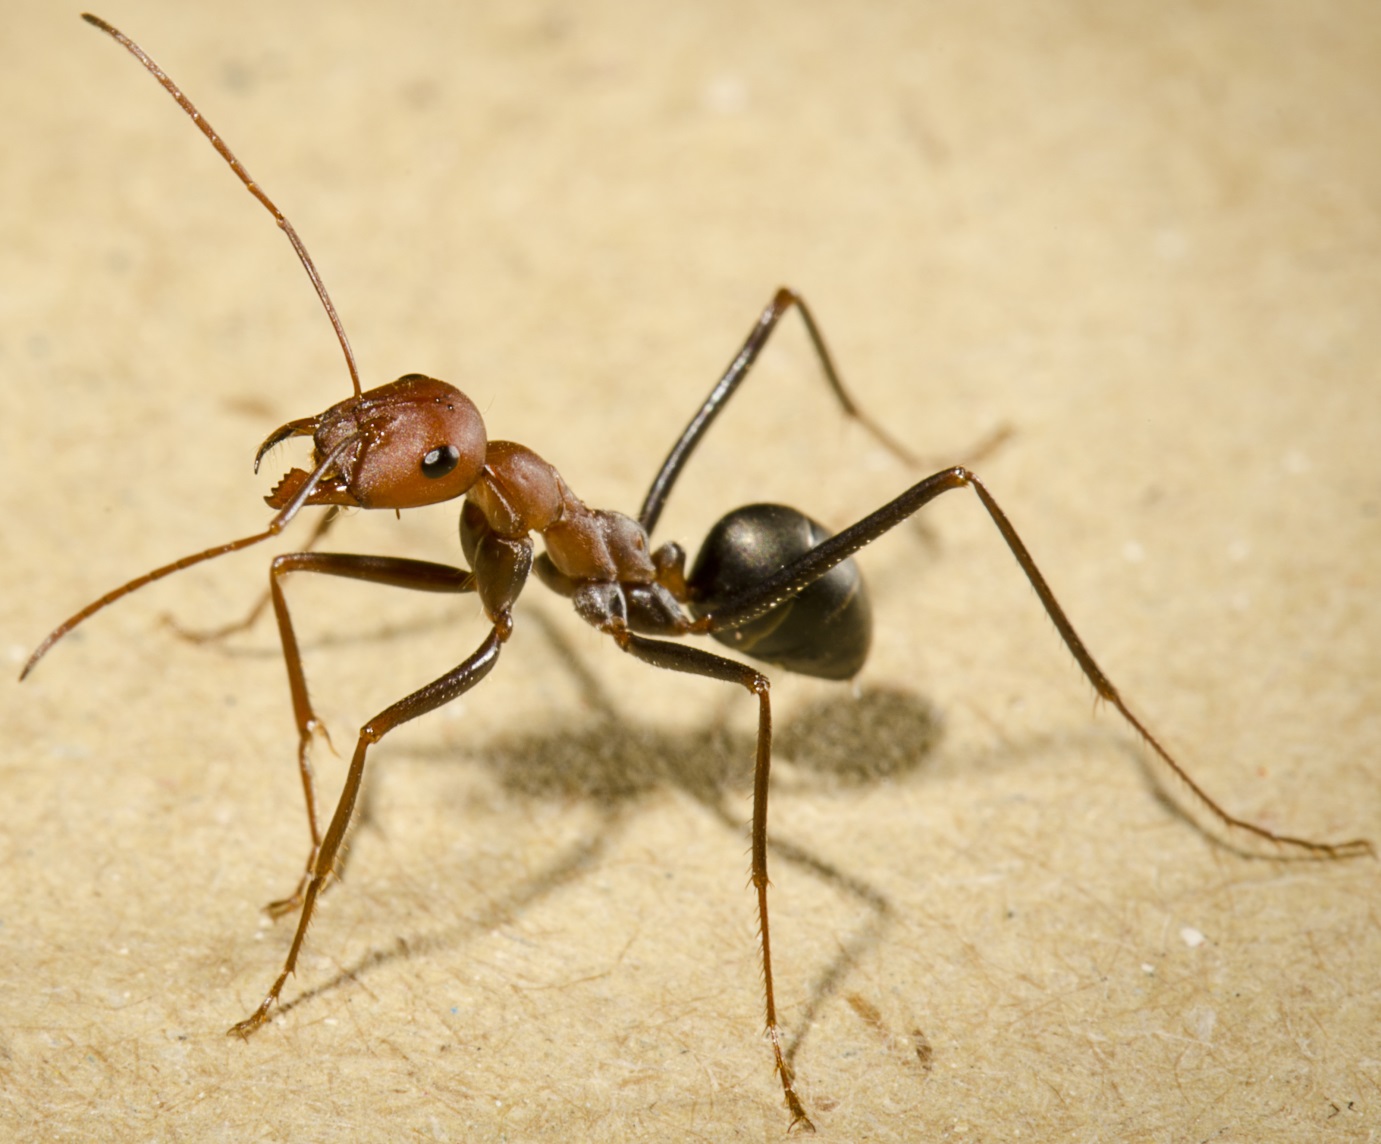 Ants can find their way home walking backwards, but they have to peek first